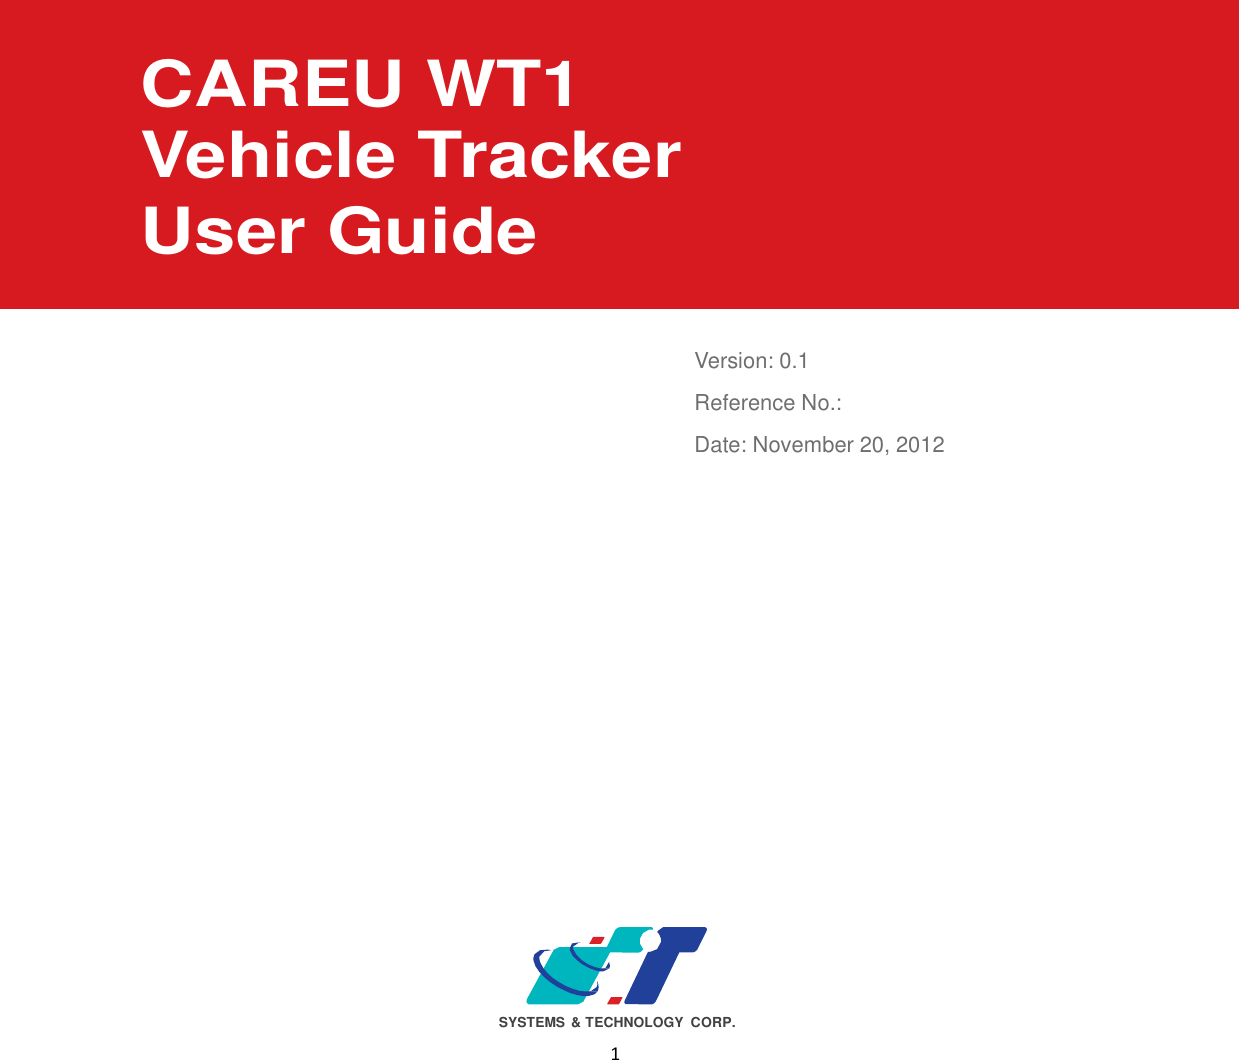  1                       CAREU WT1 Vehicle Tracker User Guide     Version: 0.1 Reference No.:  Date: November 20, 2012                             SYSTEMS  &amp; TECHNOLOGY CORP. 